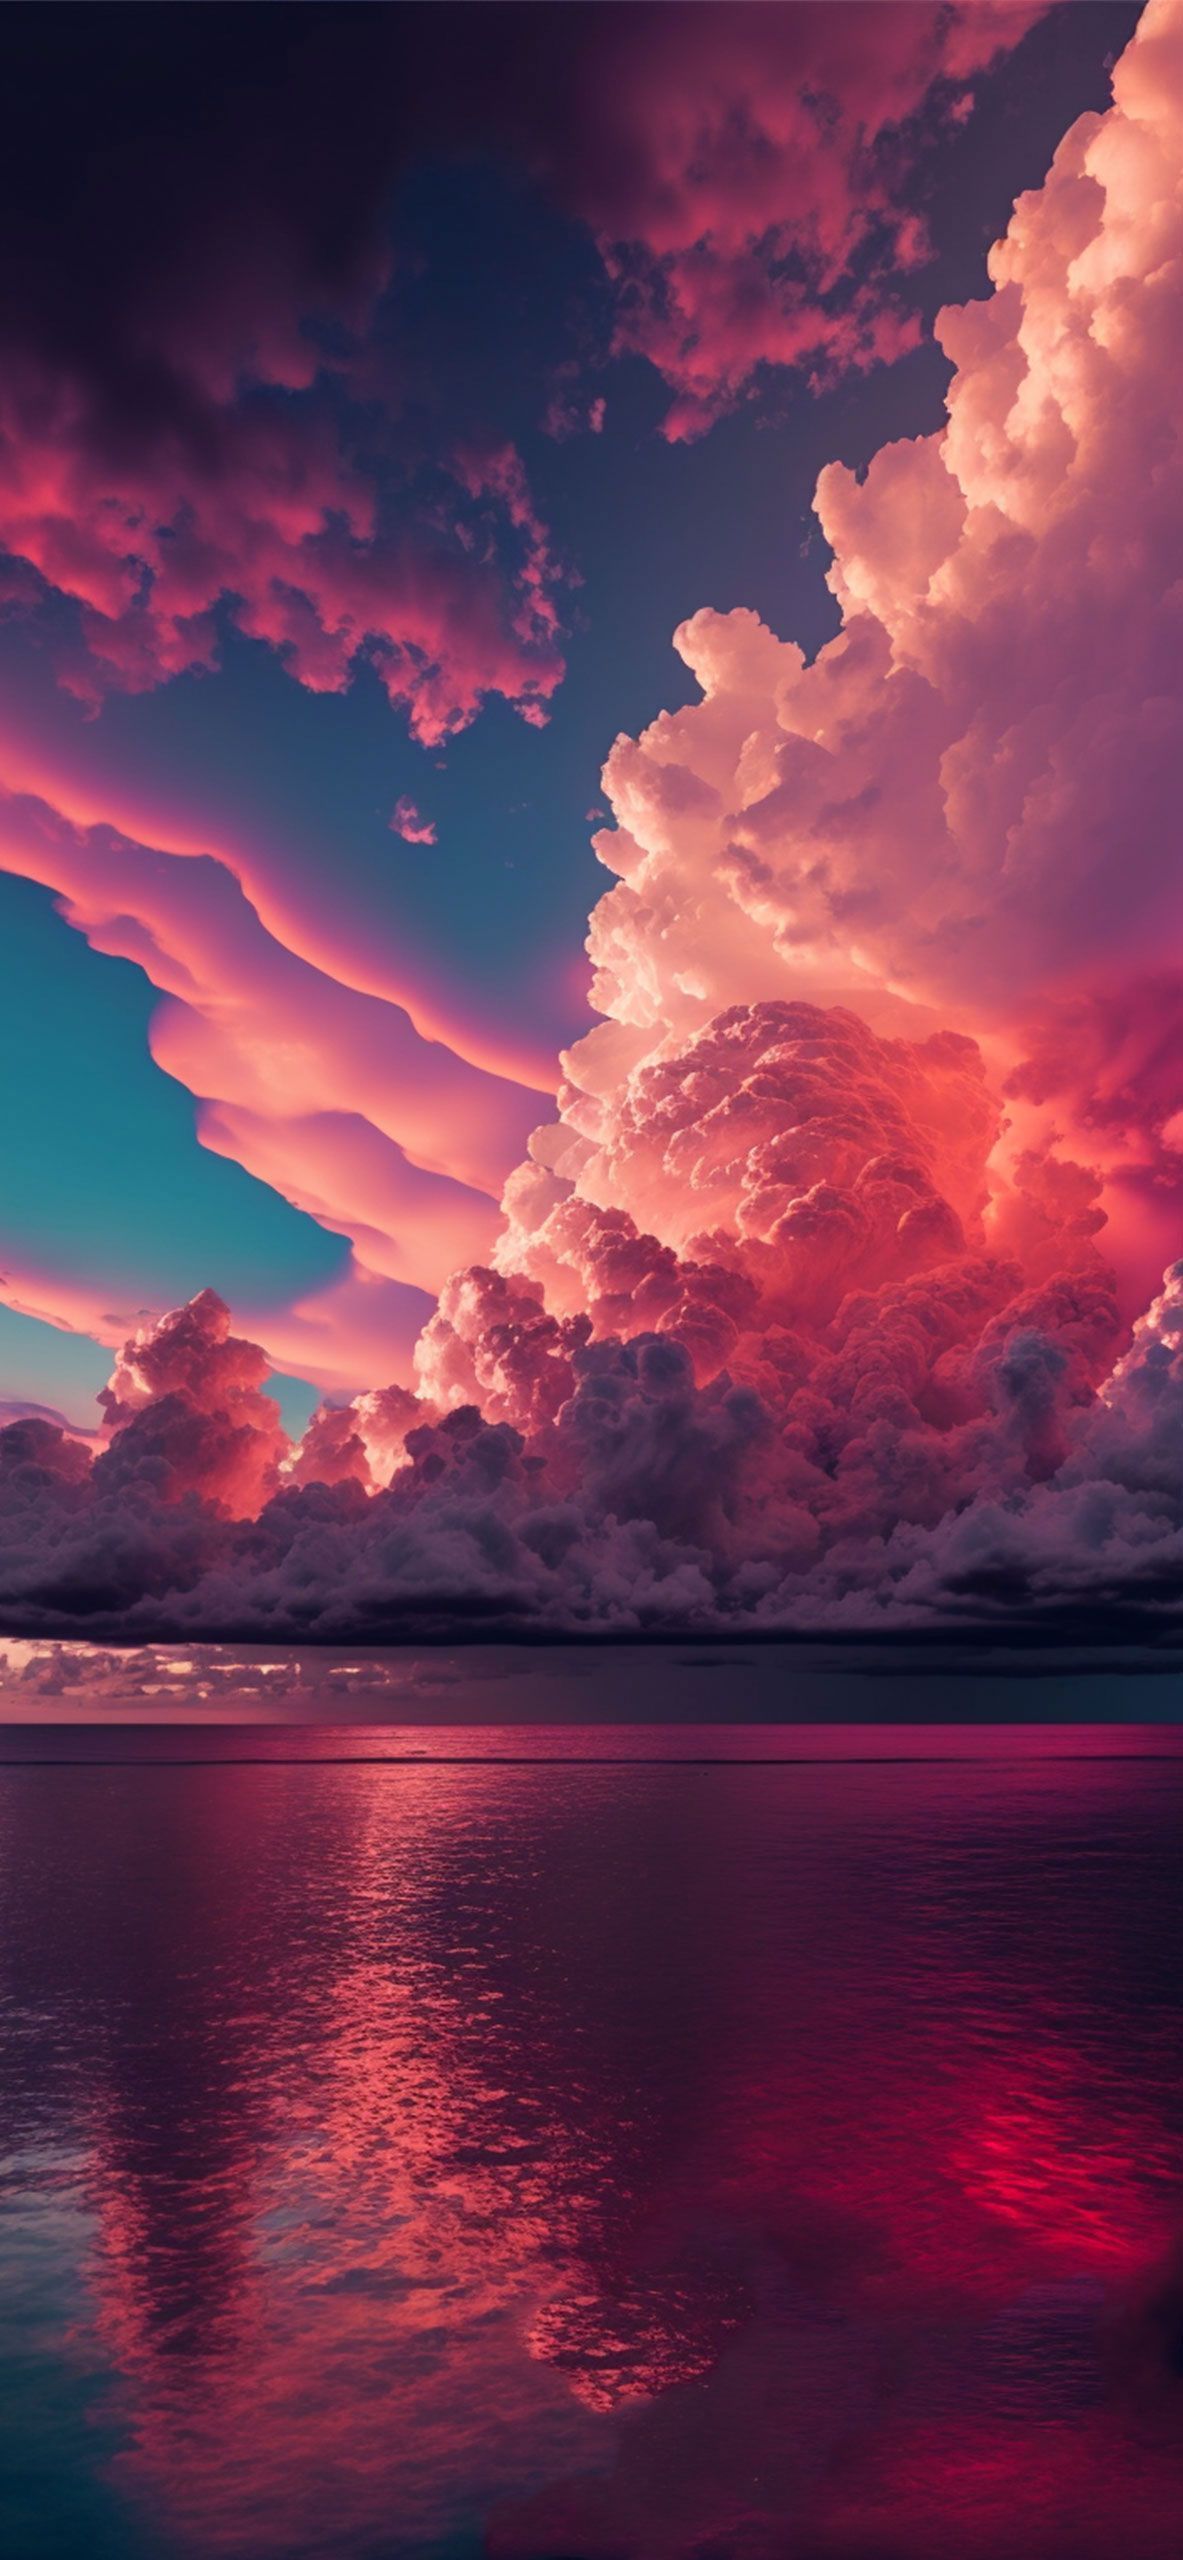 A beautiful sunset with clouds over the water - Cloud, pink, Texas